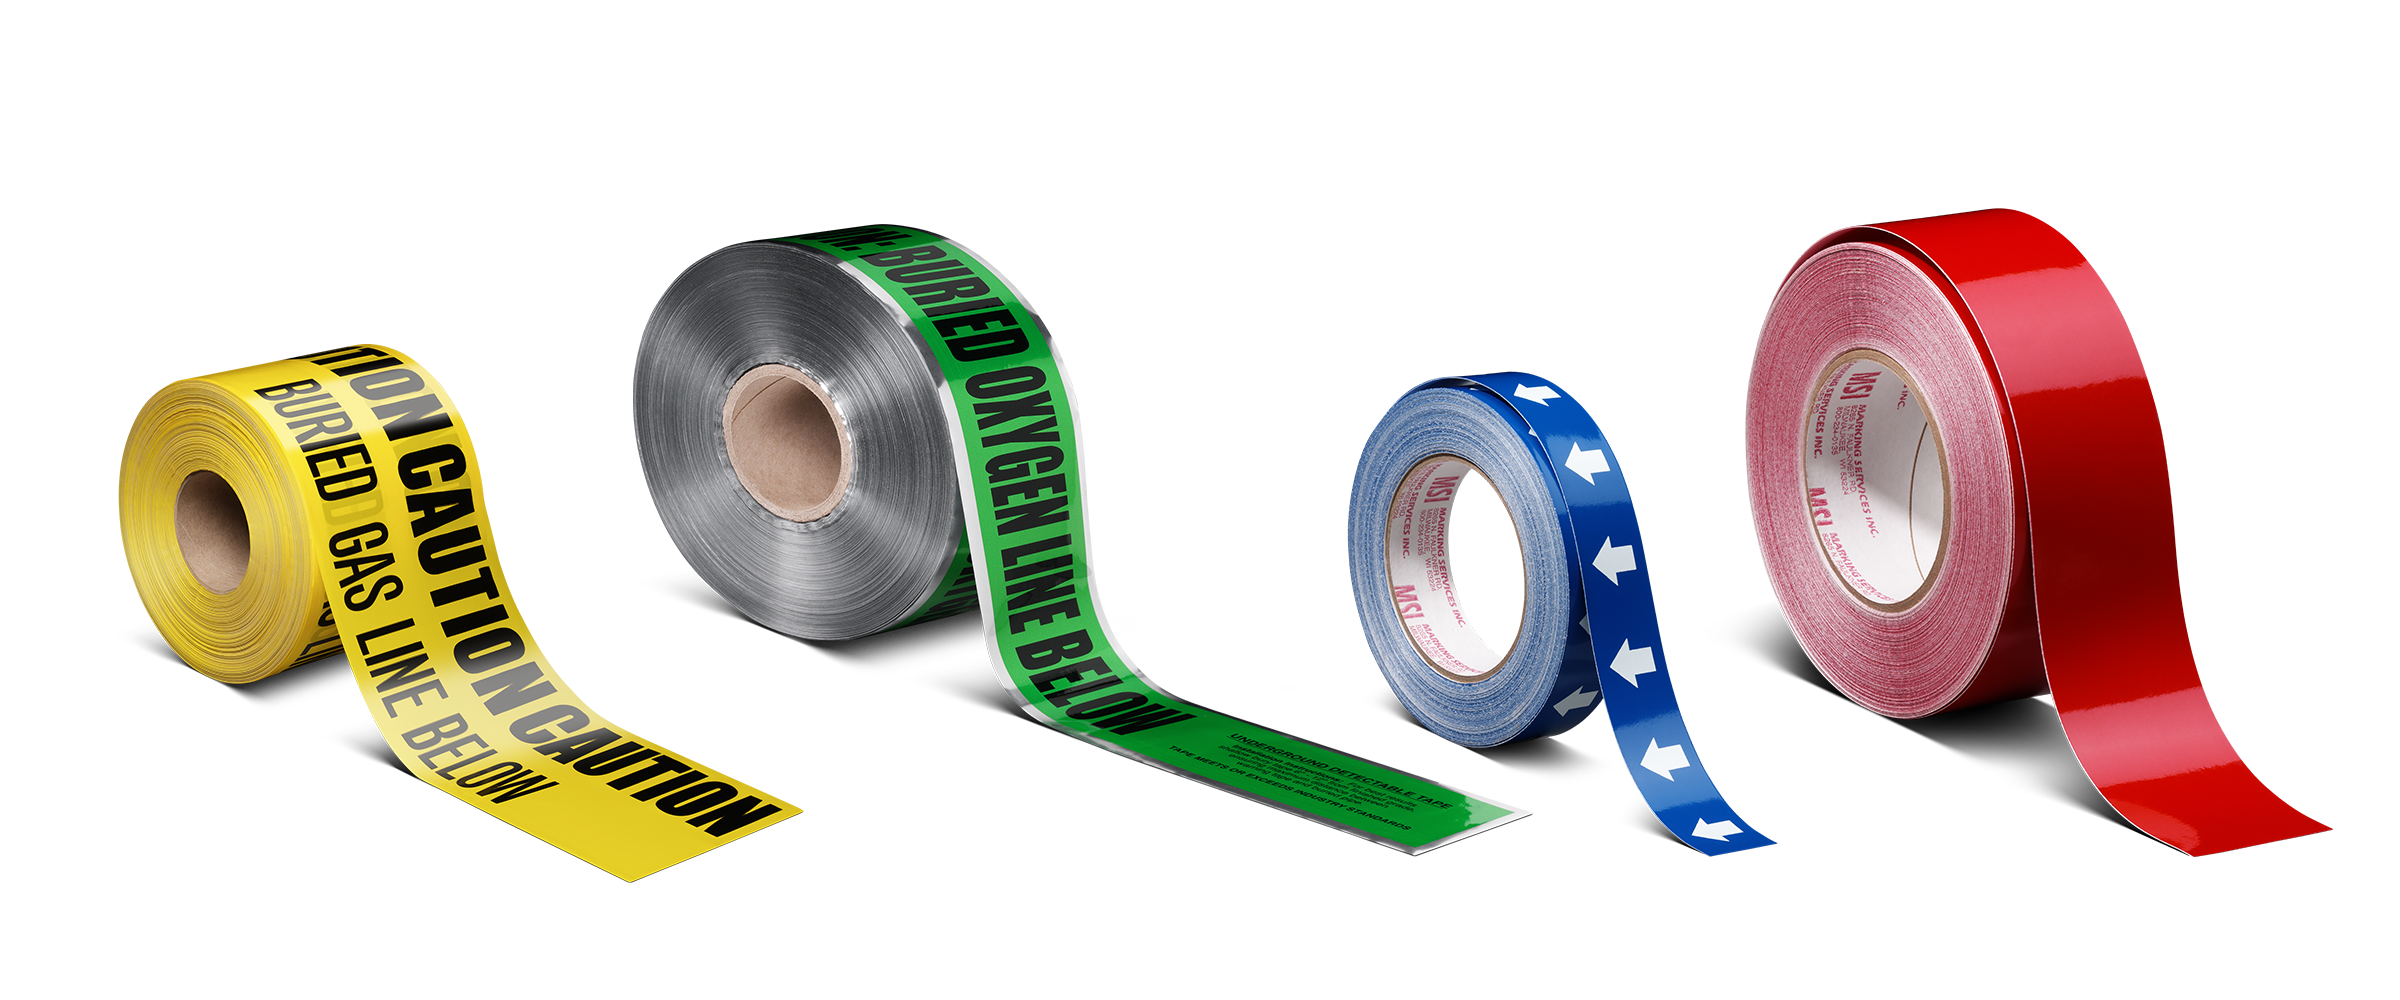 Tape | Marking Services, Inc.